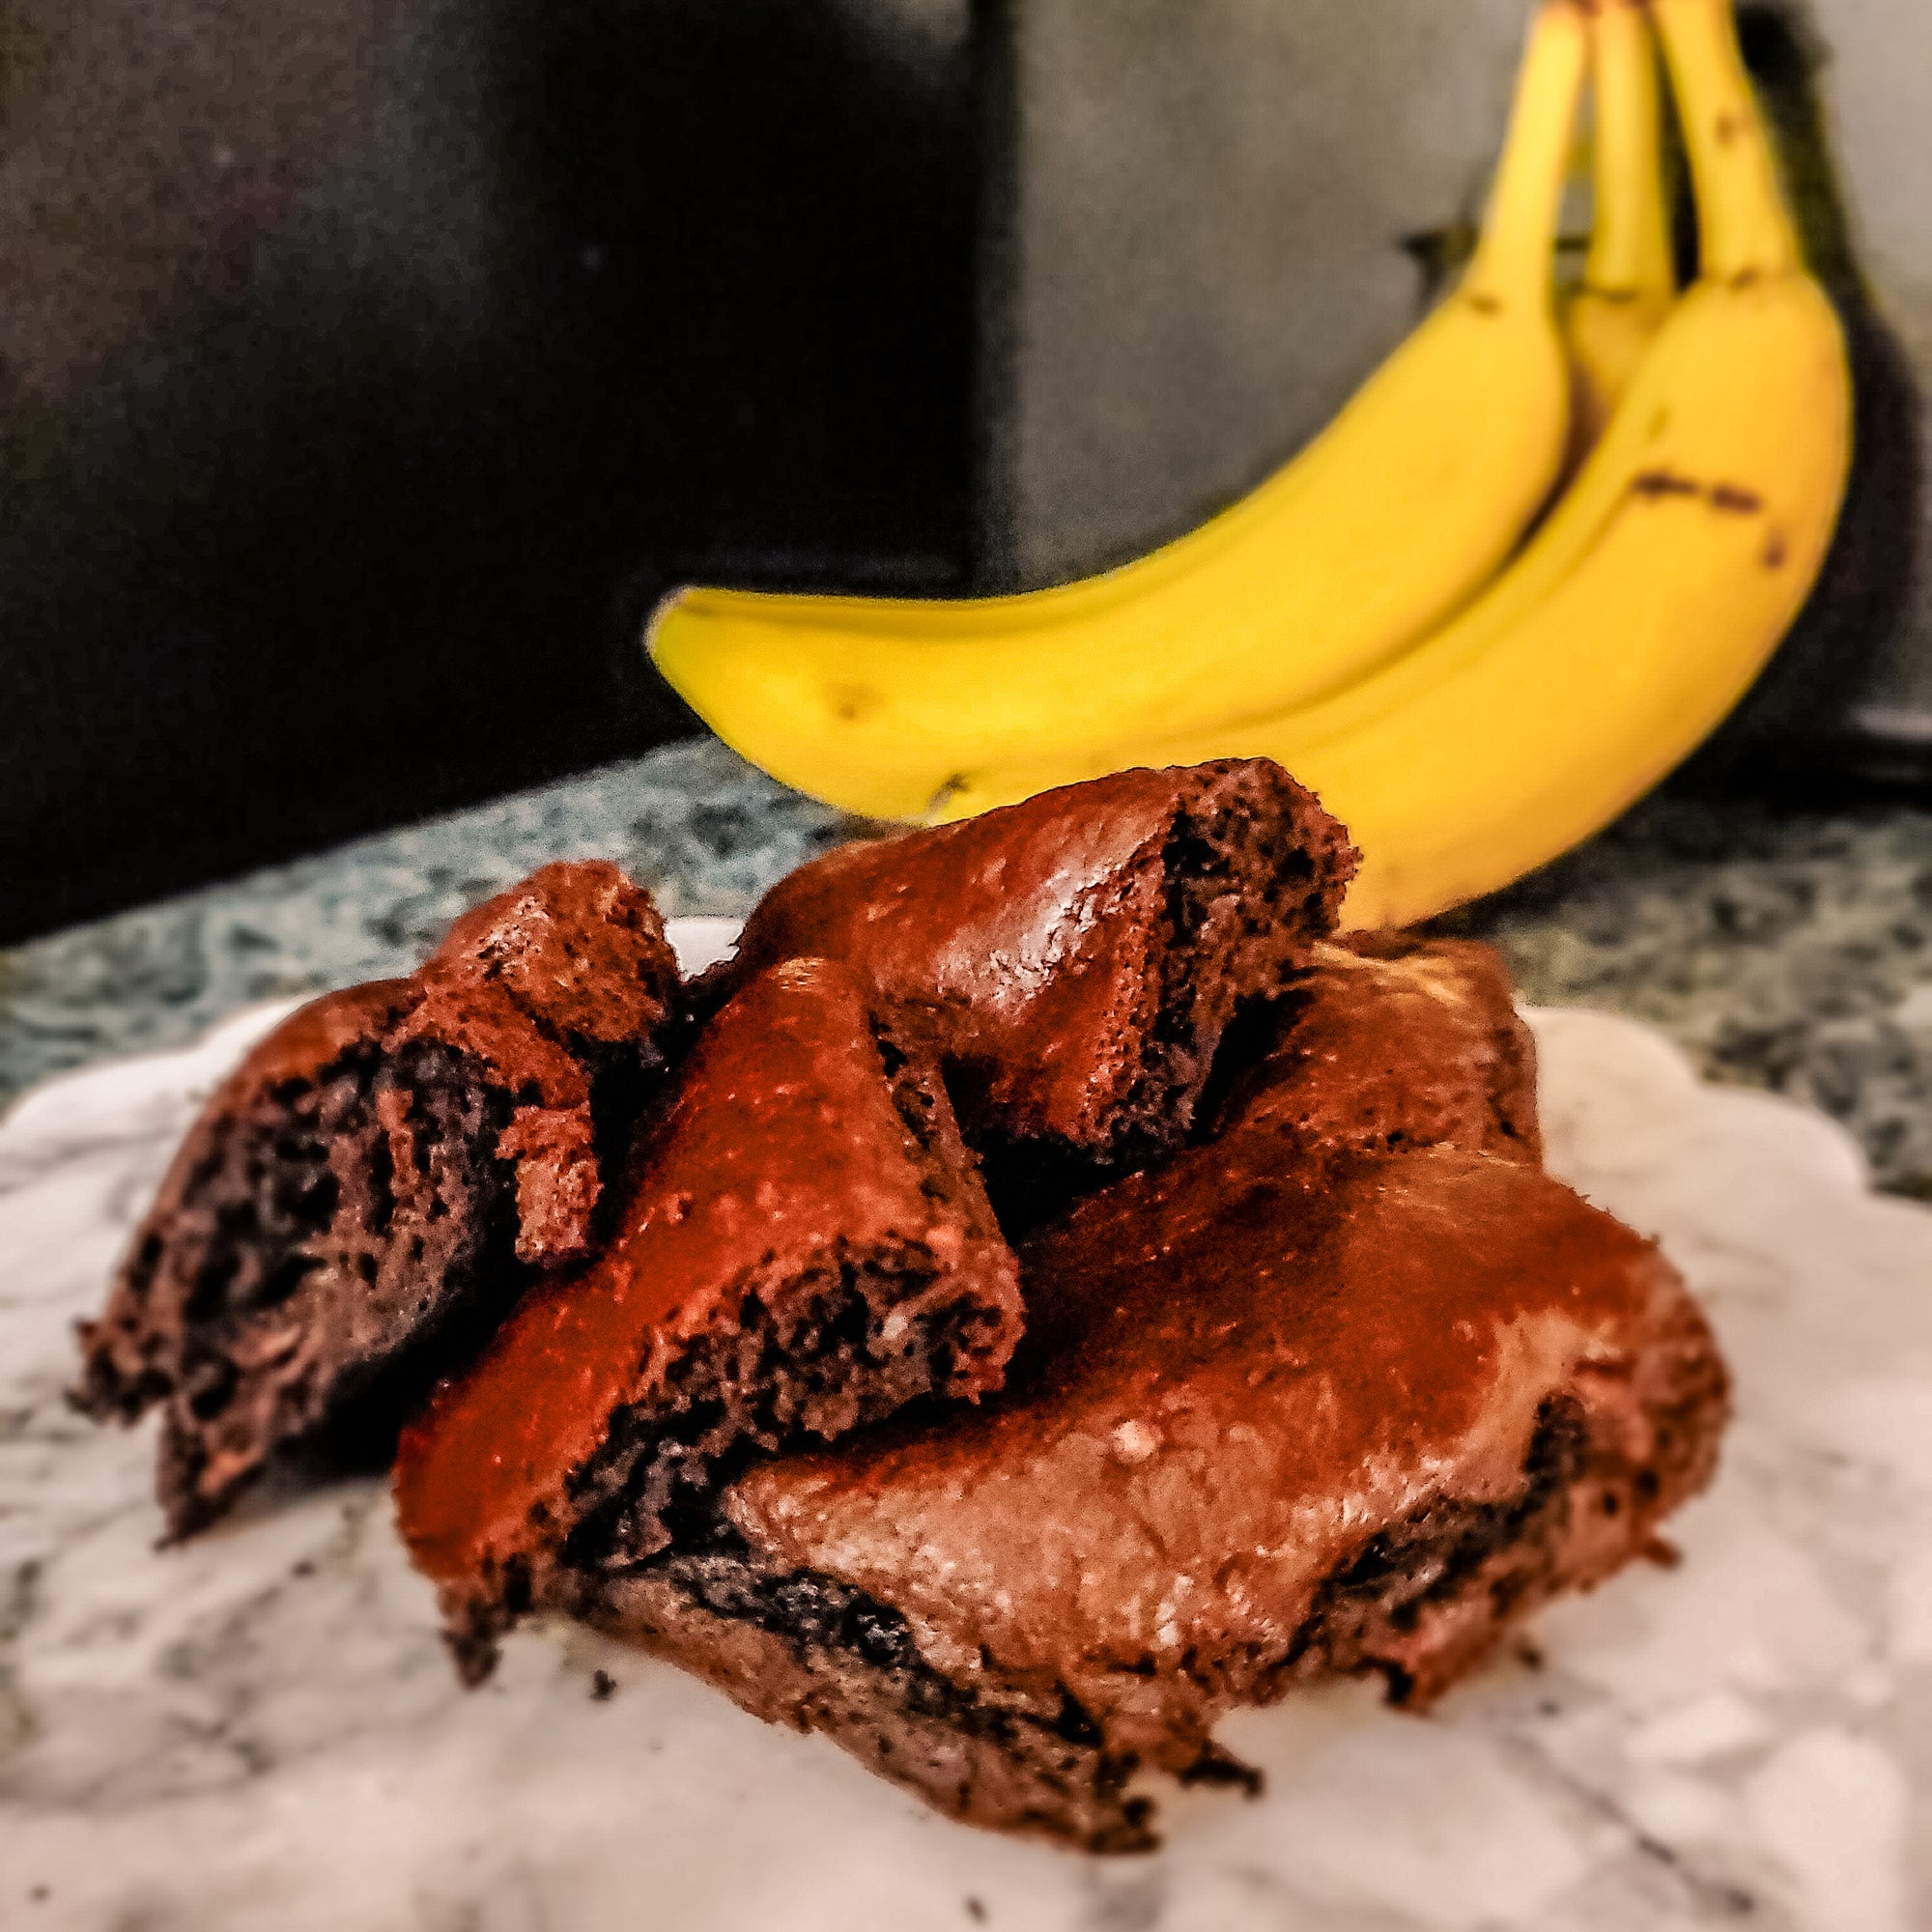 Protein brownie made from banana